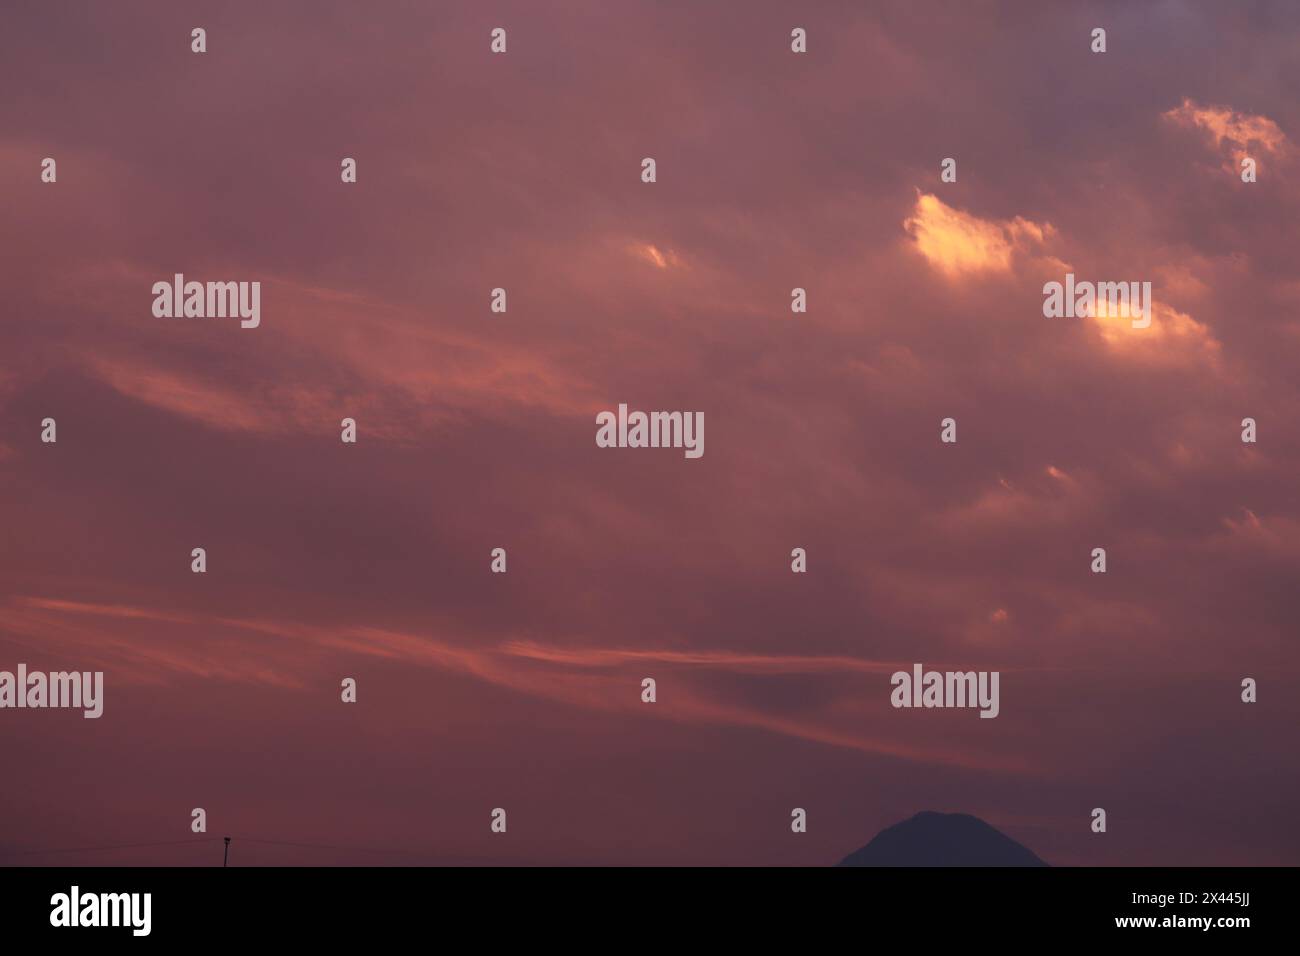 Dramatic cloudy sky as background. Stock Photo